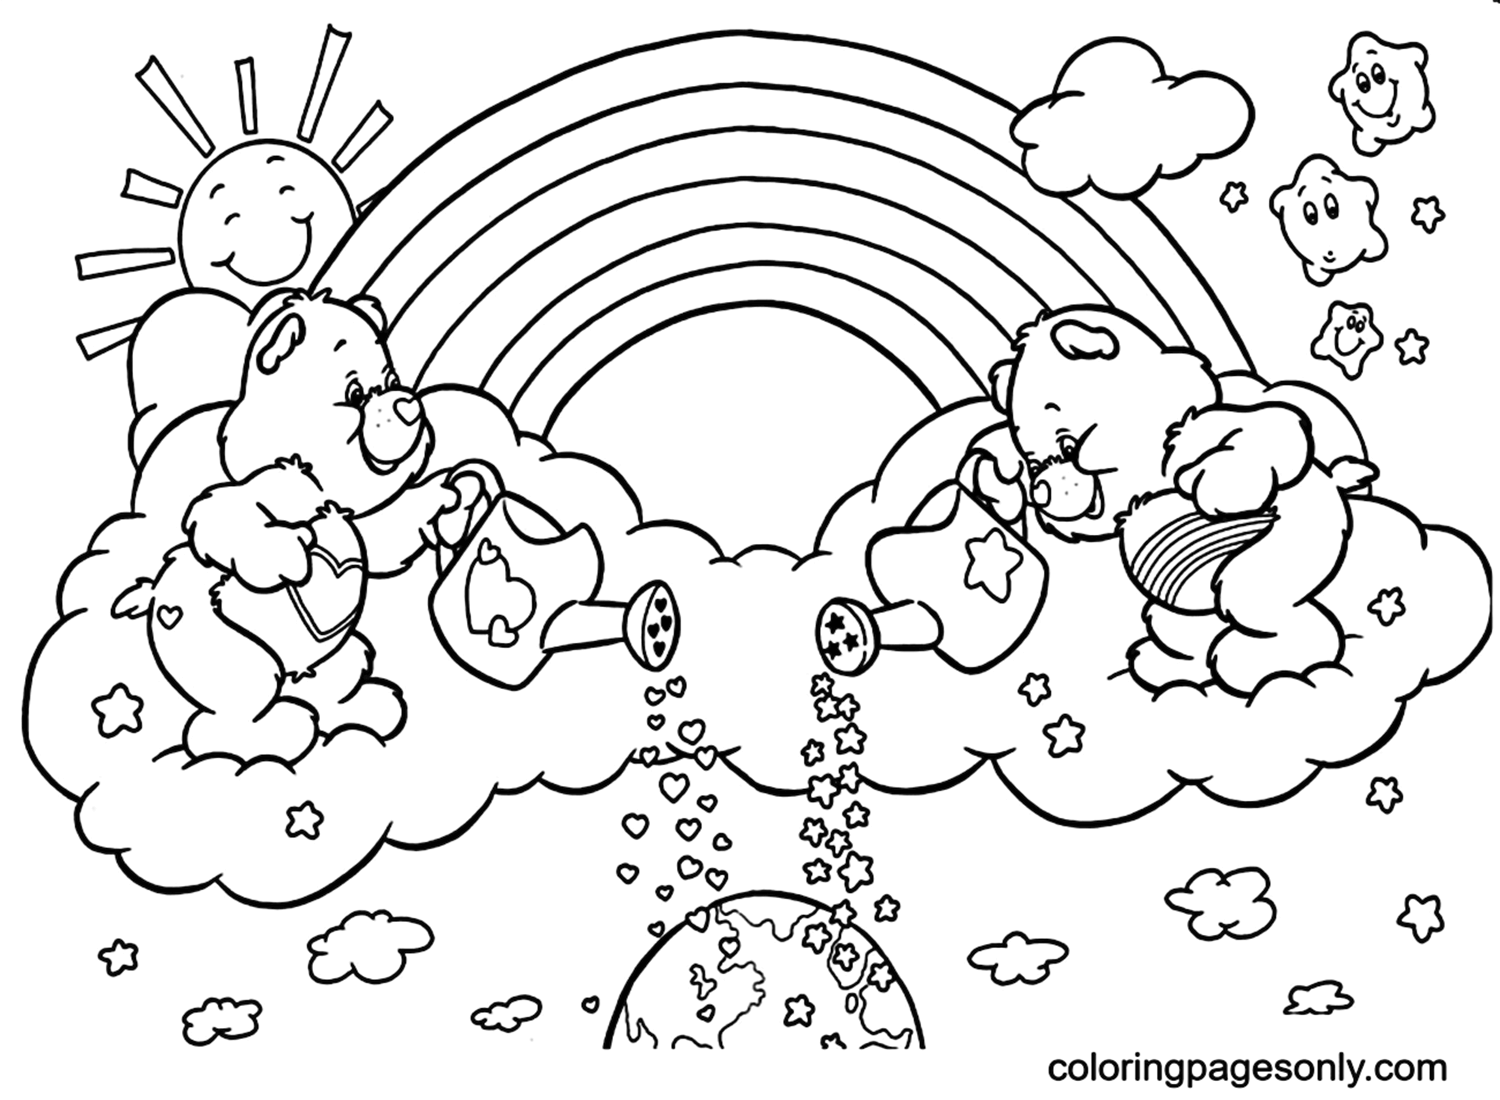 Bears On The Cloud And Rainbow Coloring Page